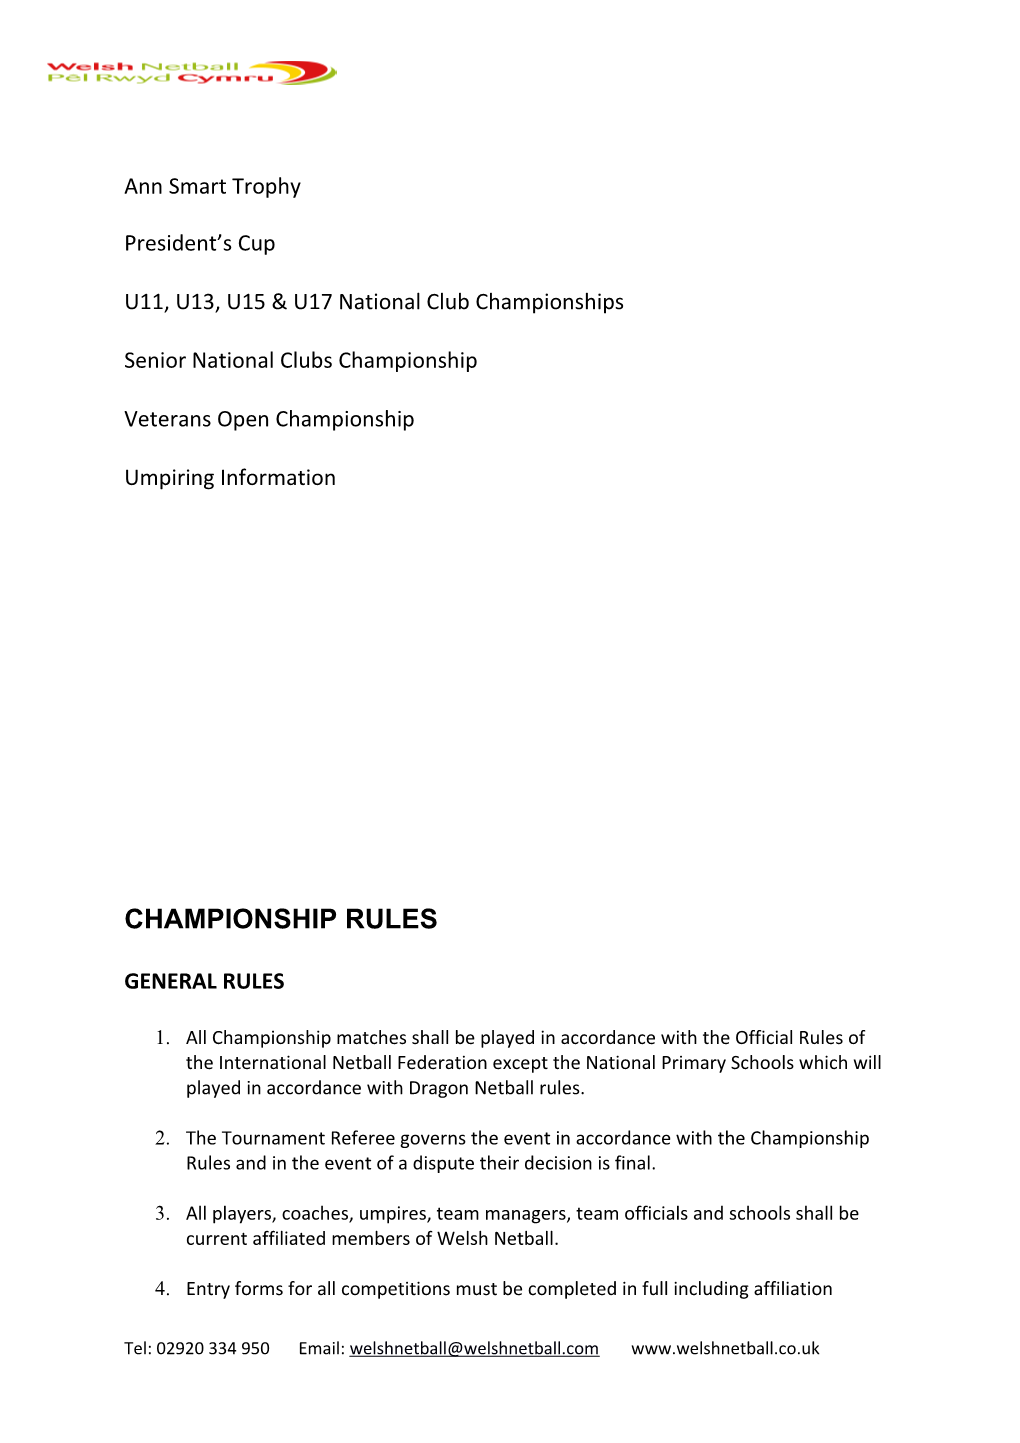 General Championship Rules